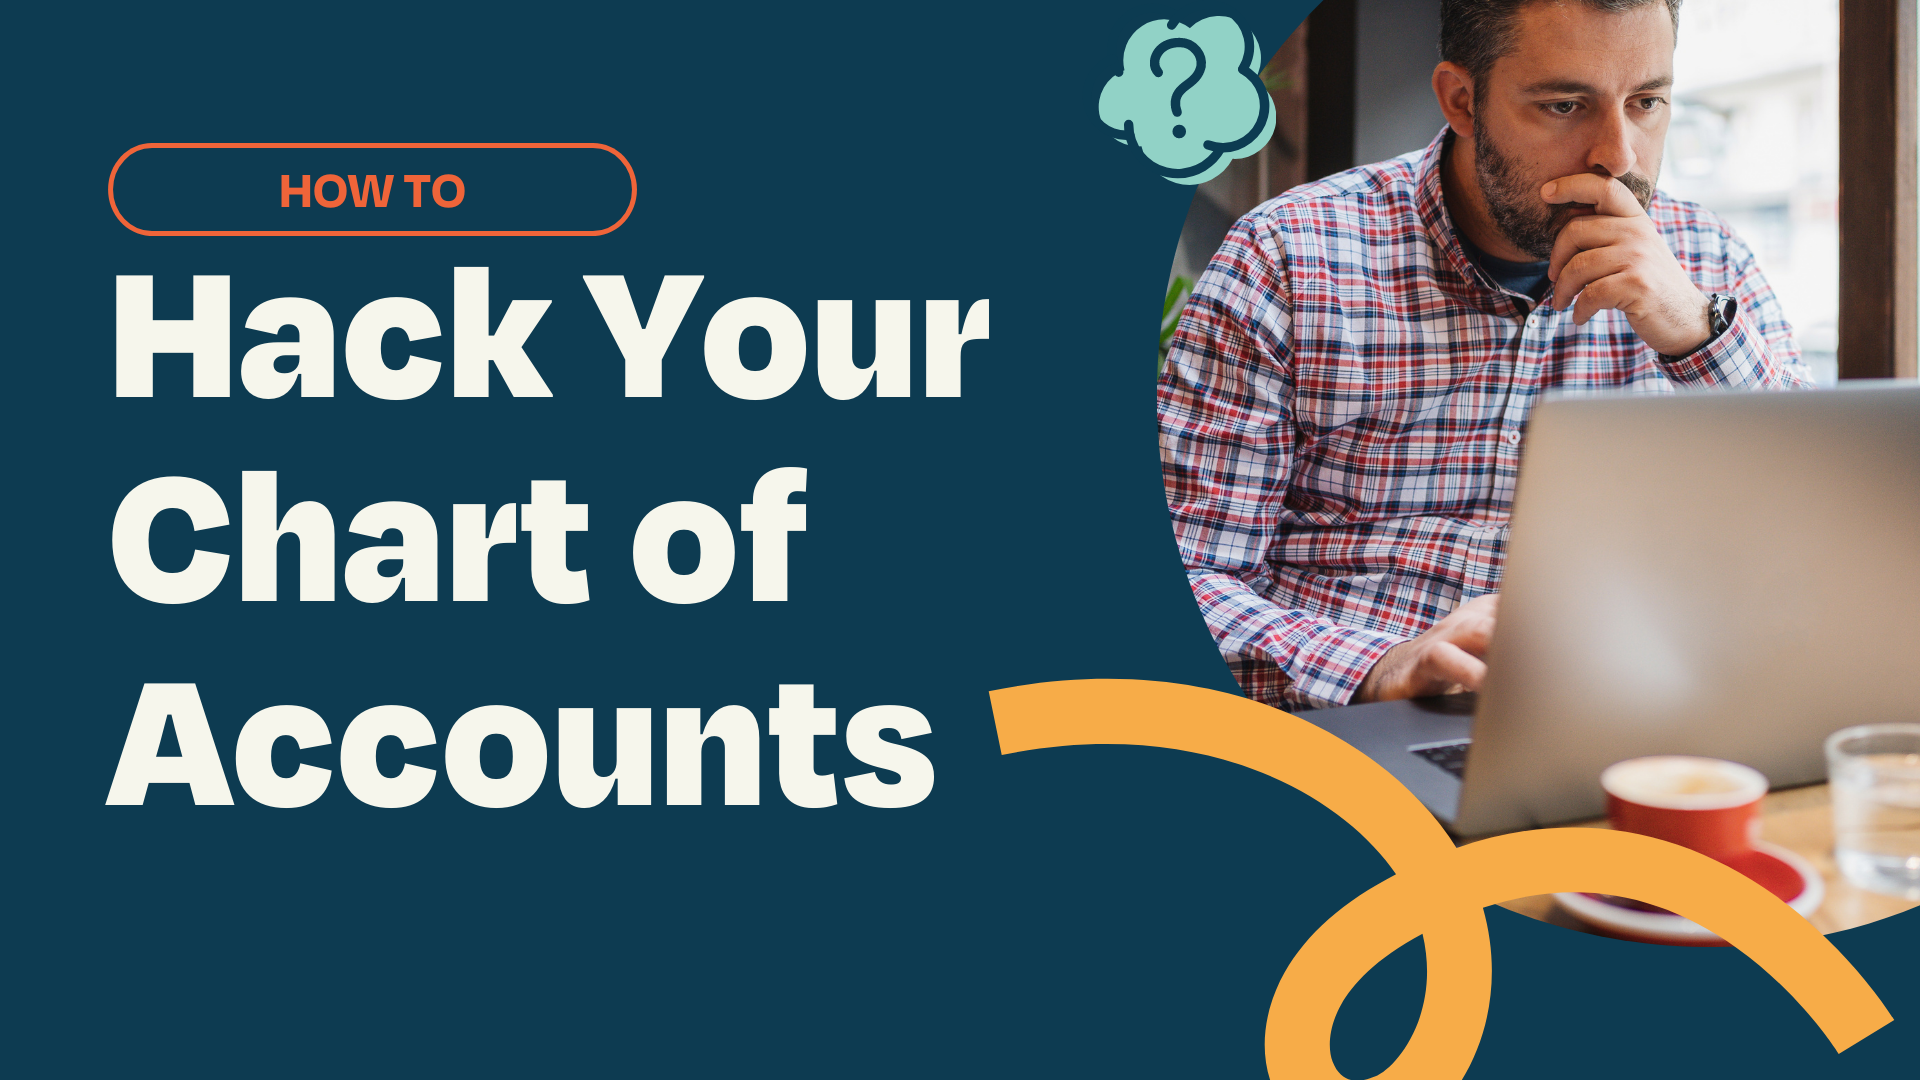 How to Hack Your Xero Chart of Accounts to Increase Profit